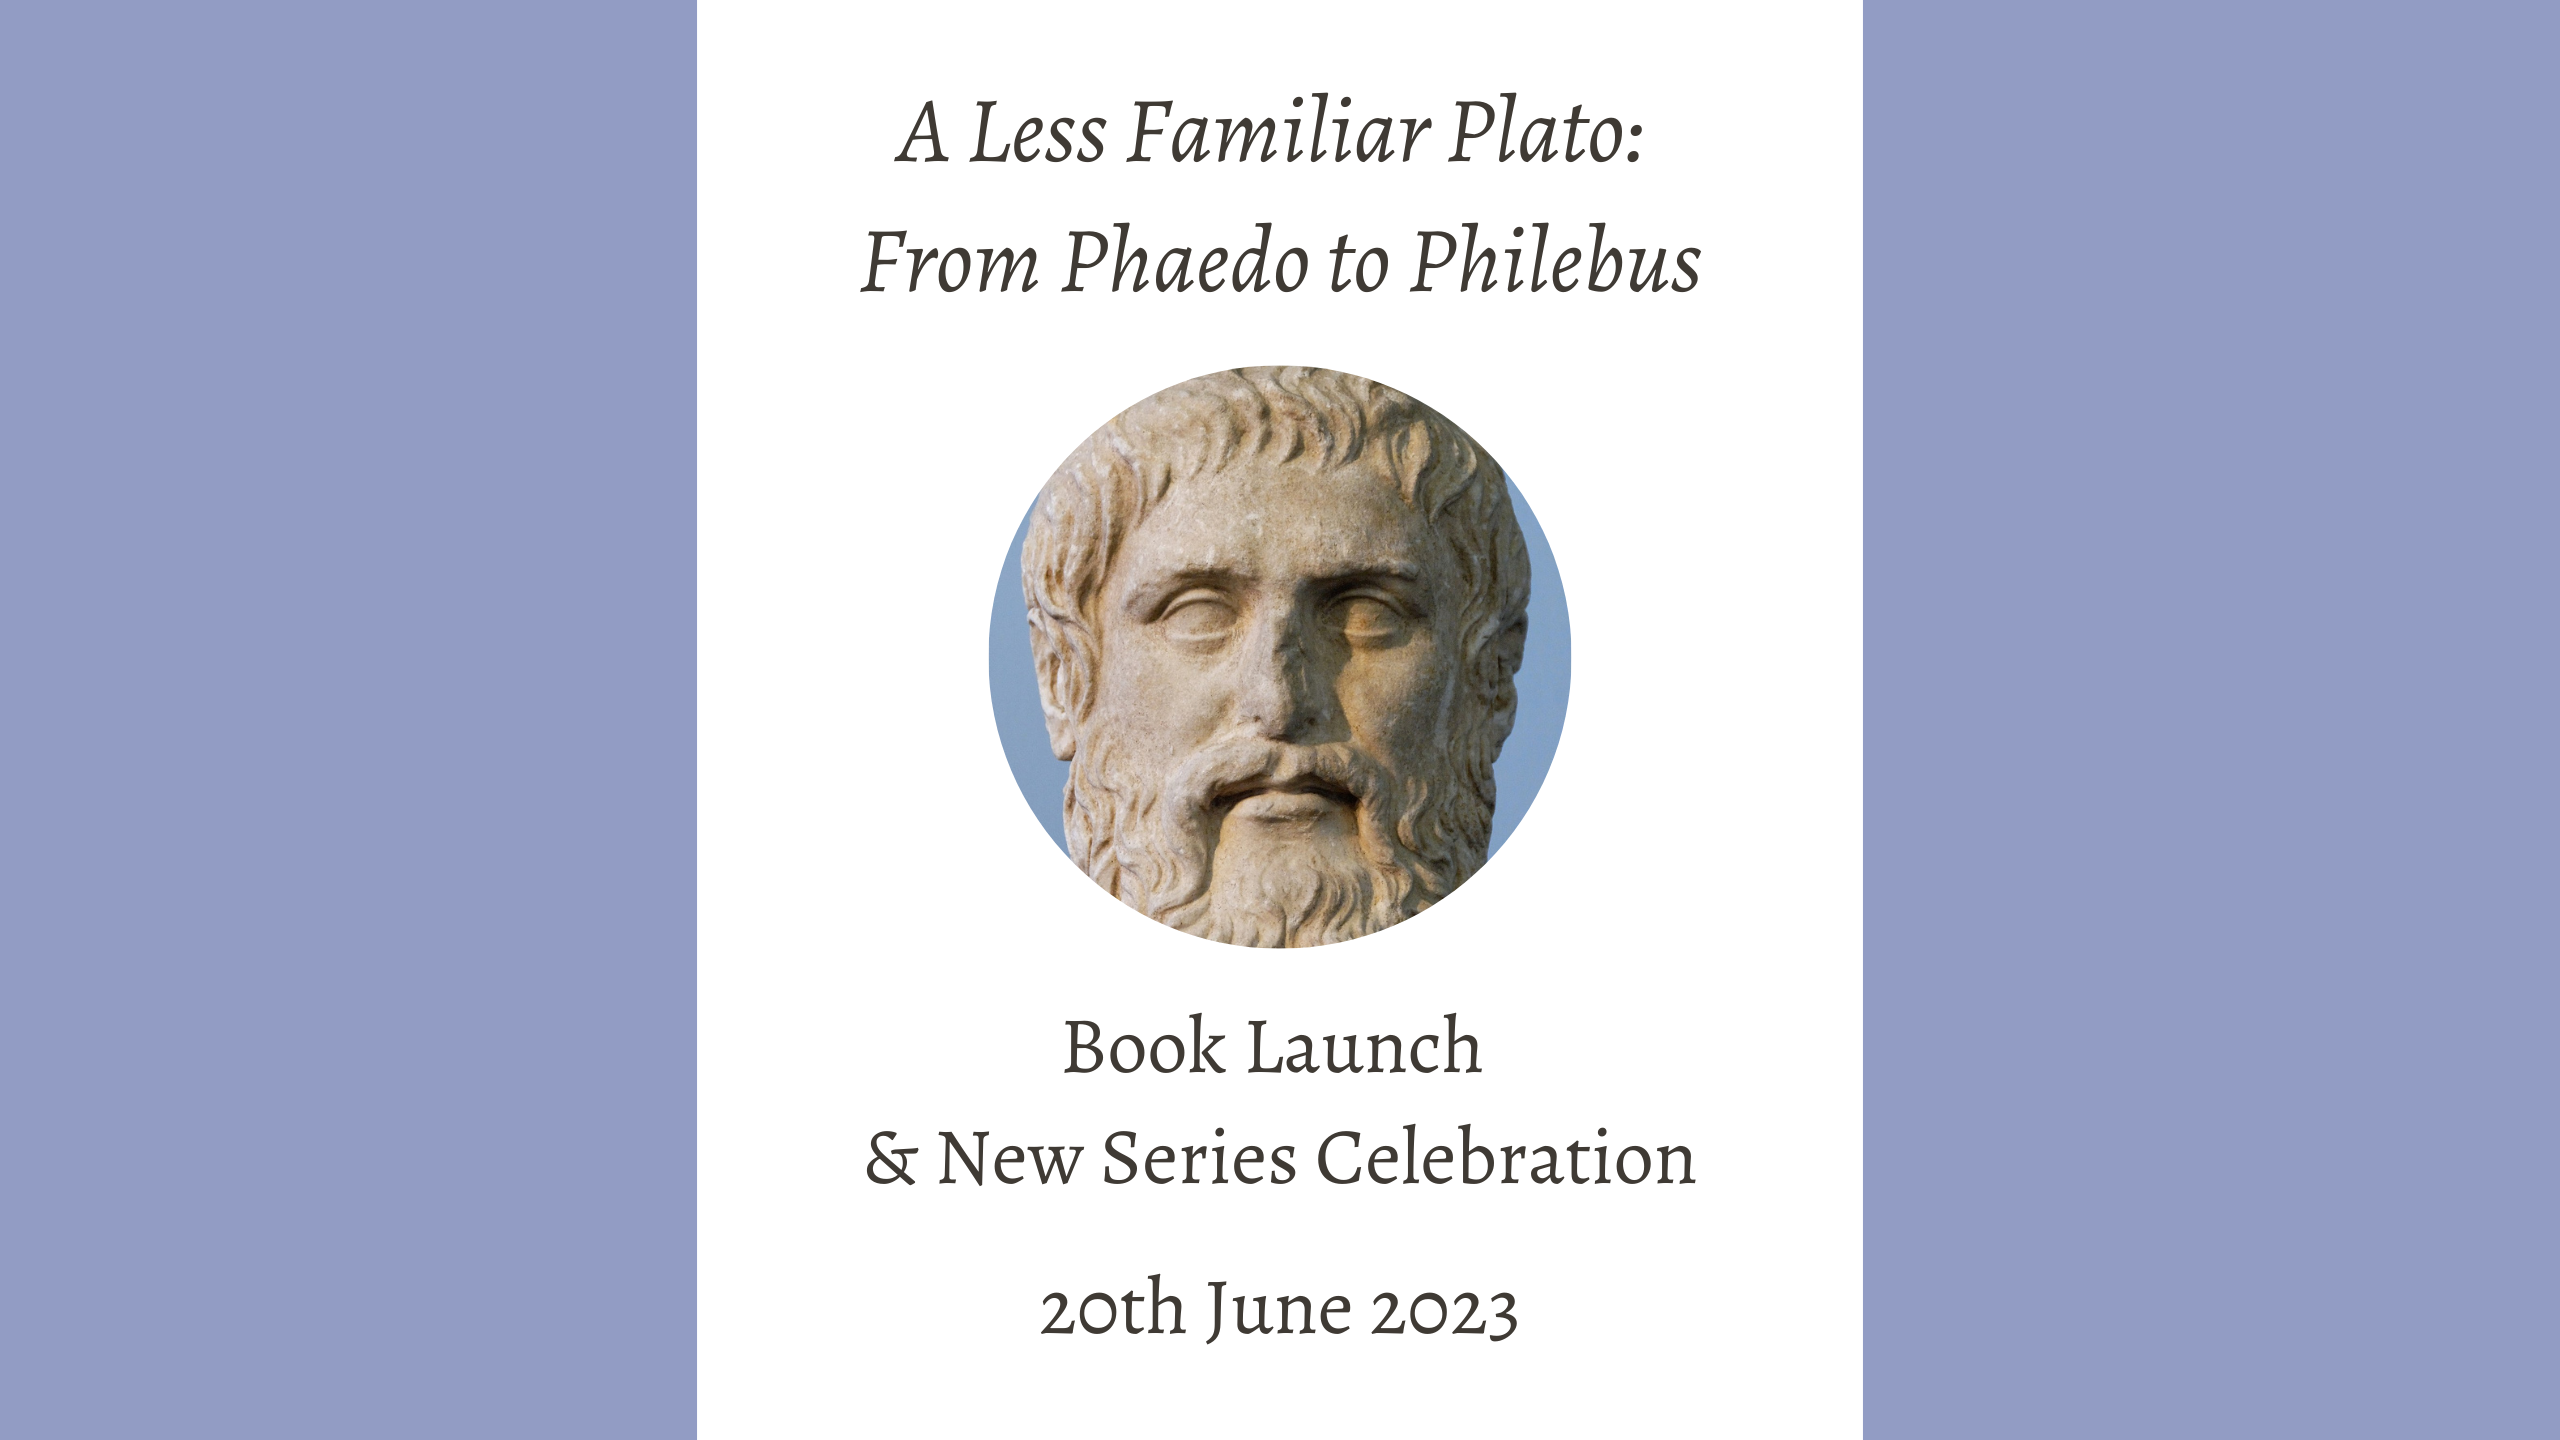 Launch Event | 'A Less Familiar Plato' with Kevin Corrigan and the Cambridge Series in Religion and Platonism | 20th June 2023